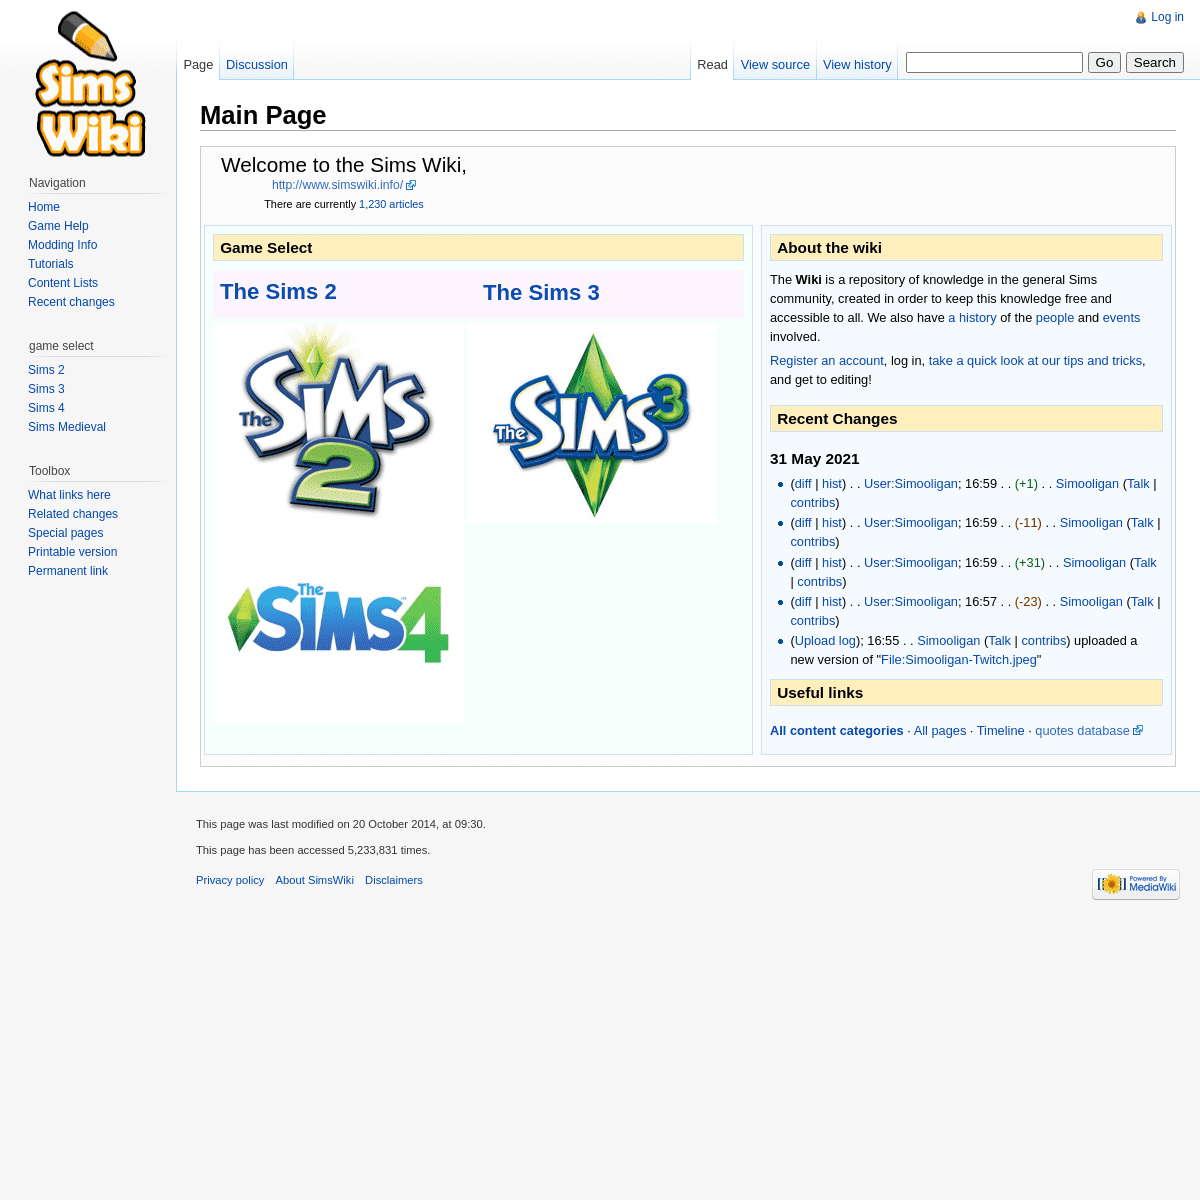 A complete backup of https://simswiki.info